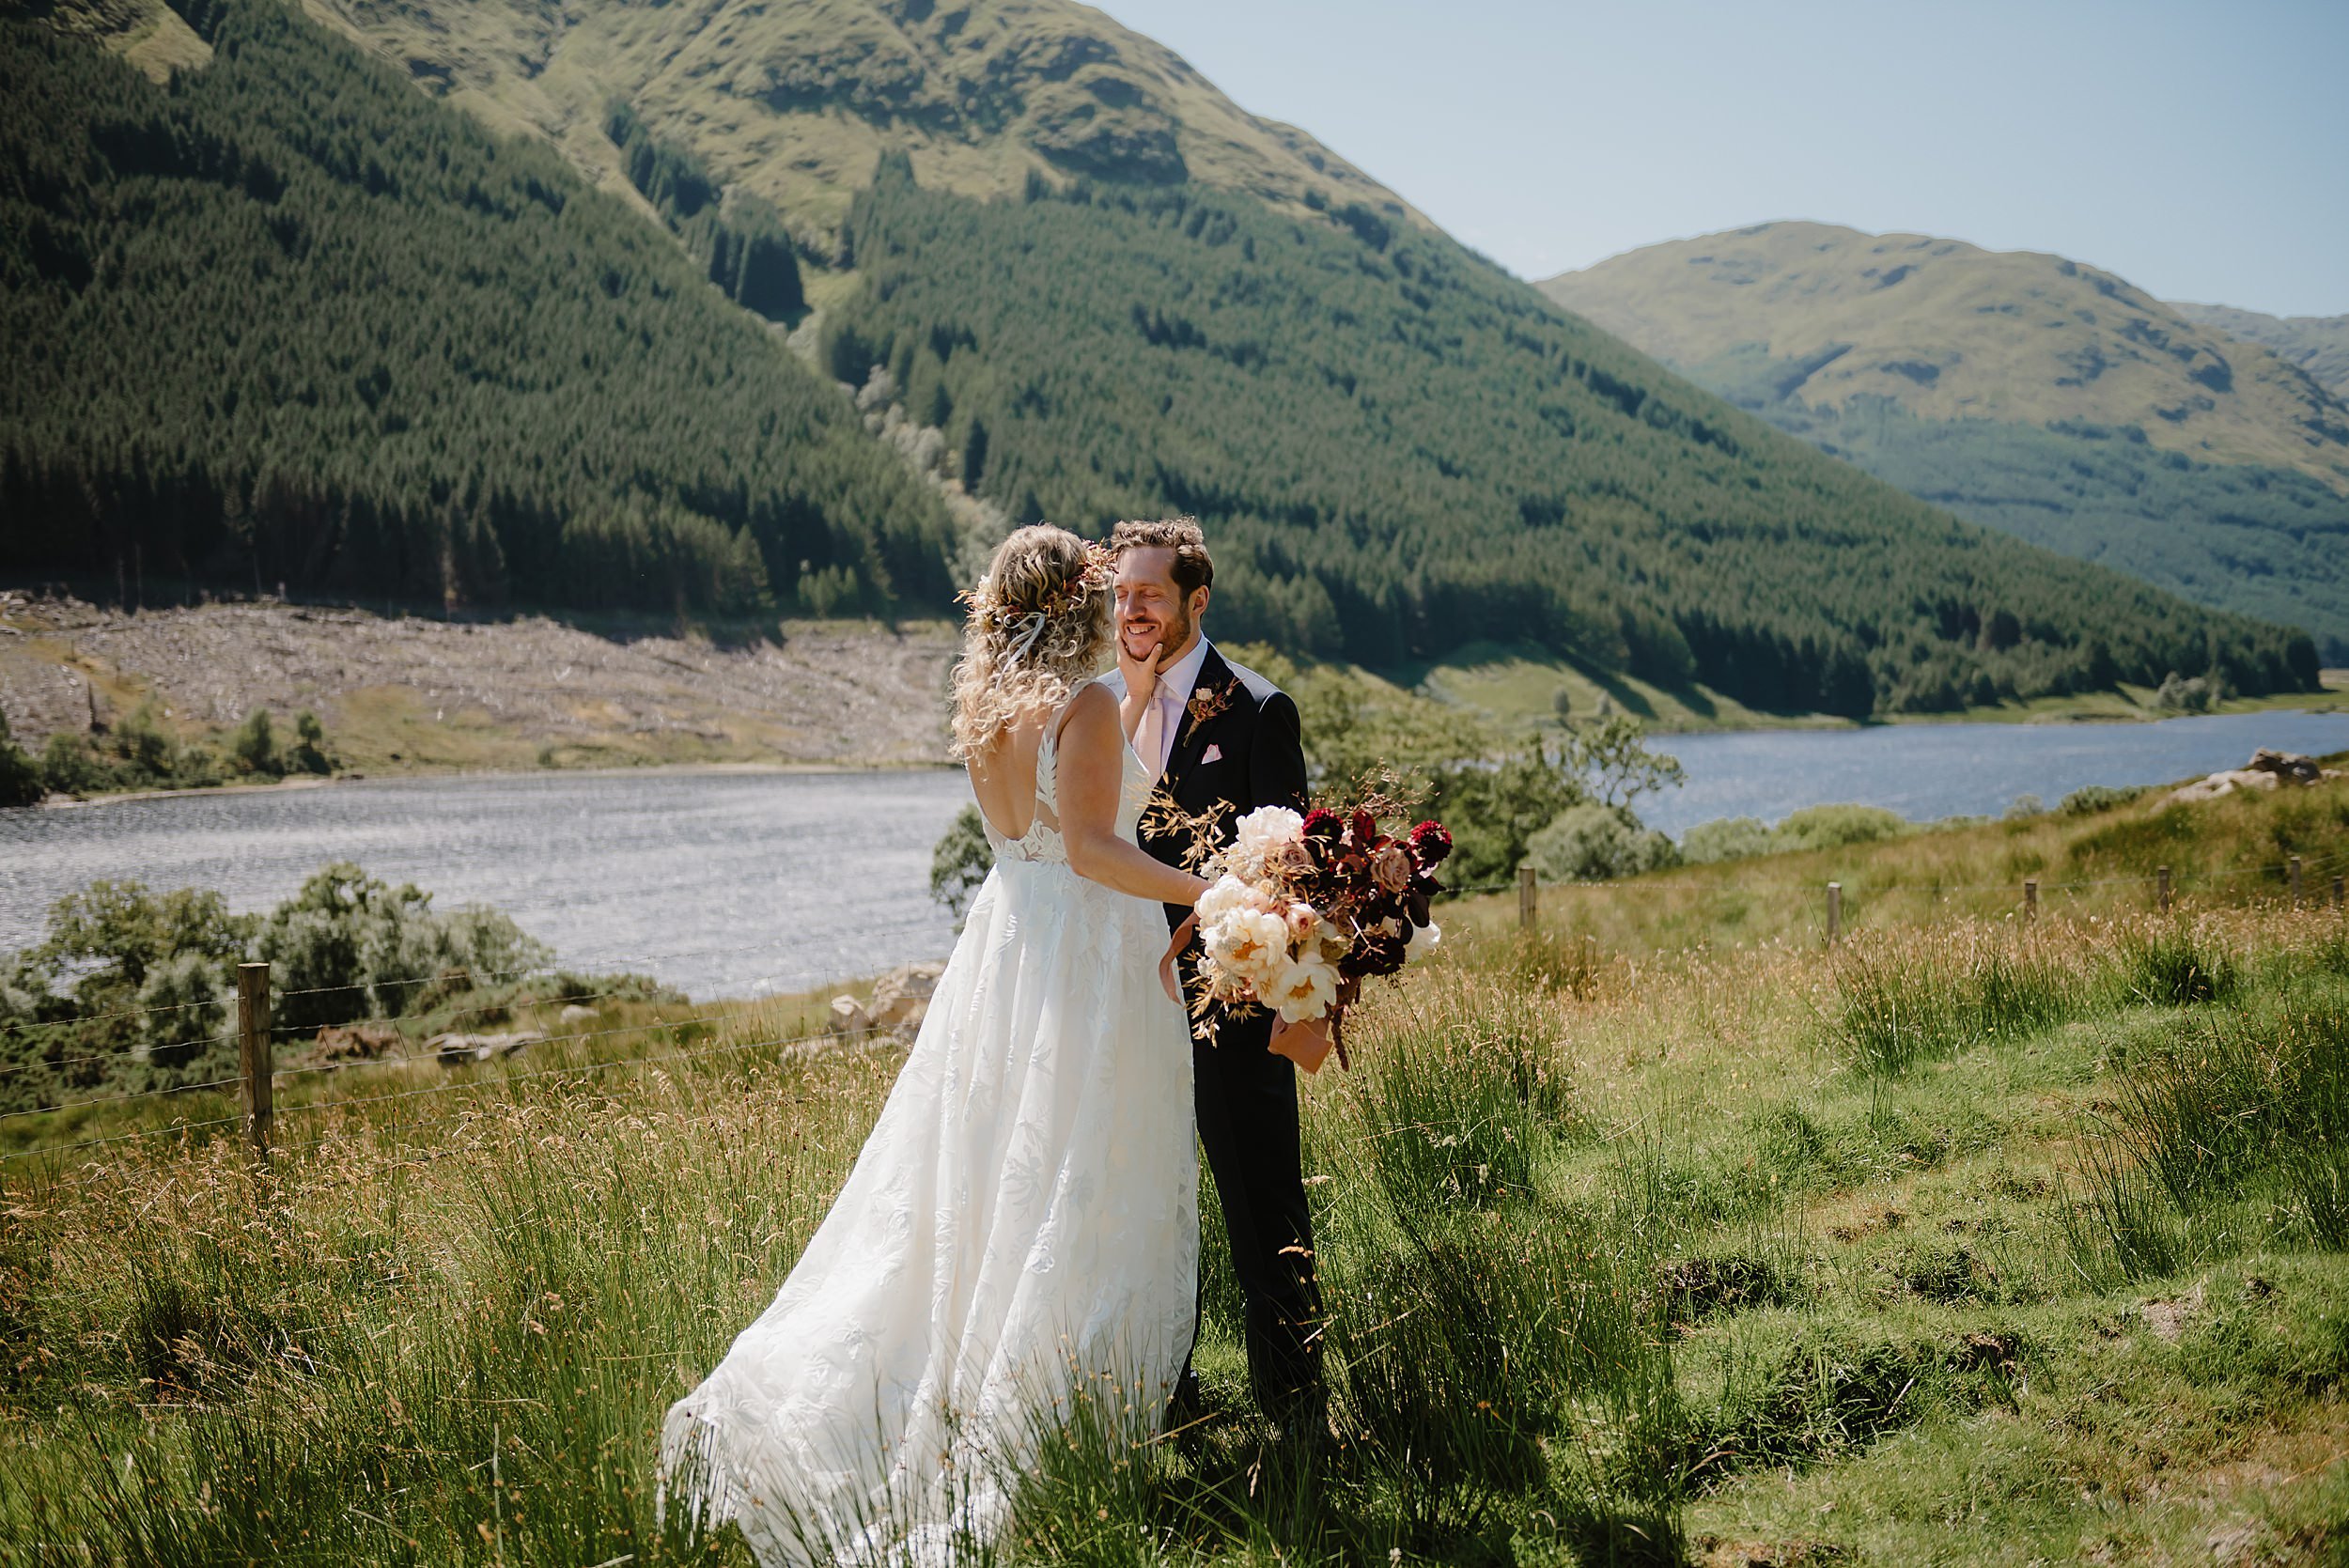 the bride and groom stand face to face in the Perthshire countryside with a loch and hills visible in the background before their Monachyle Mhor wedding in Scotland